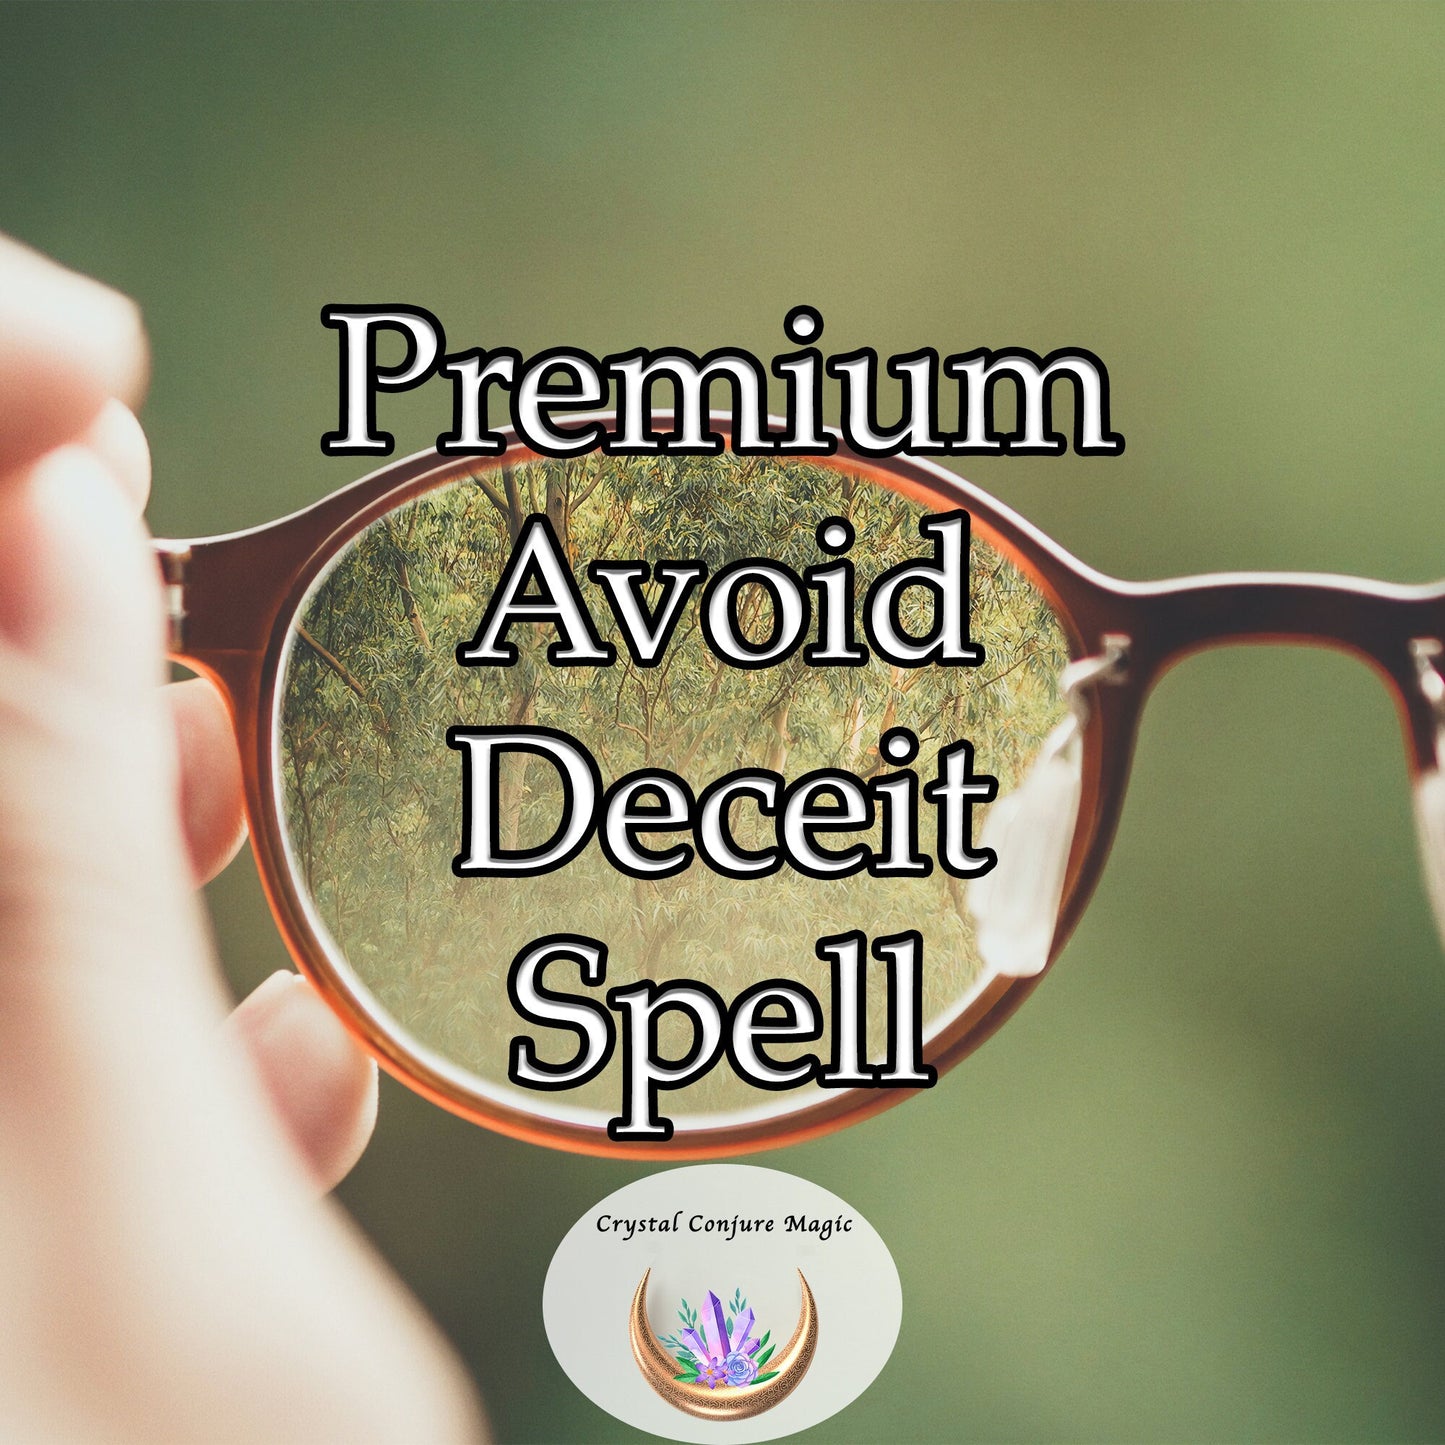 Premium Avoid Deceit Spell - refine your perception, sharpen your intuition, and heighten your discernment to avoid deception of all kind